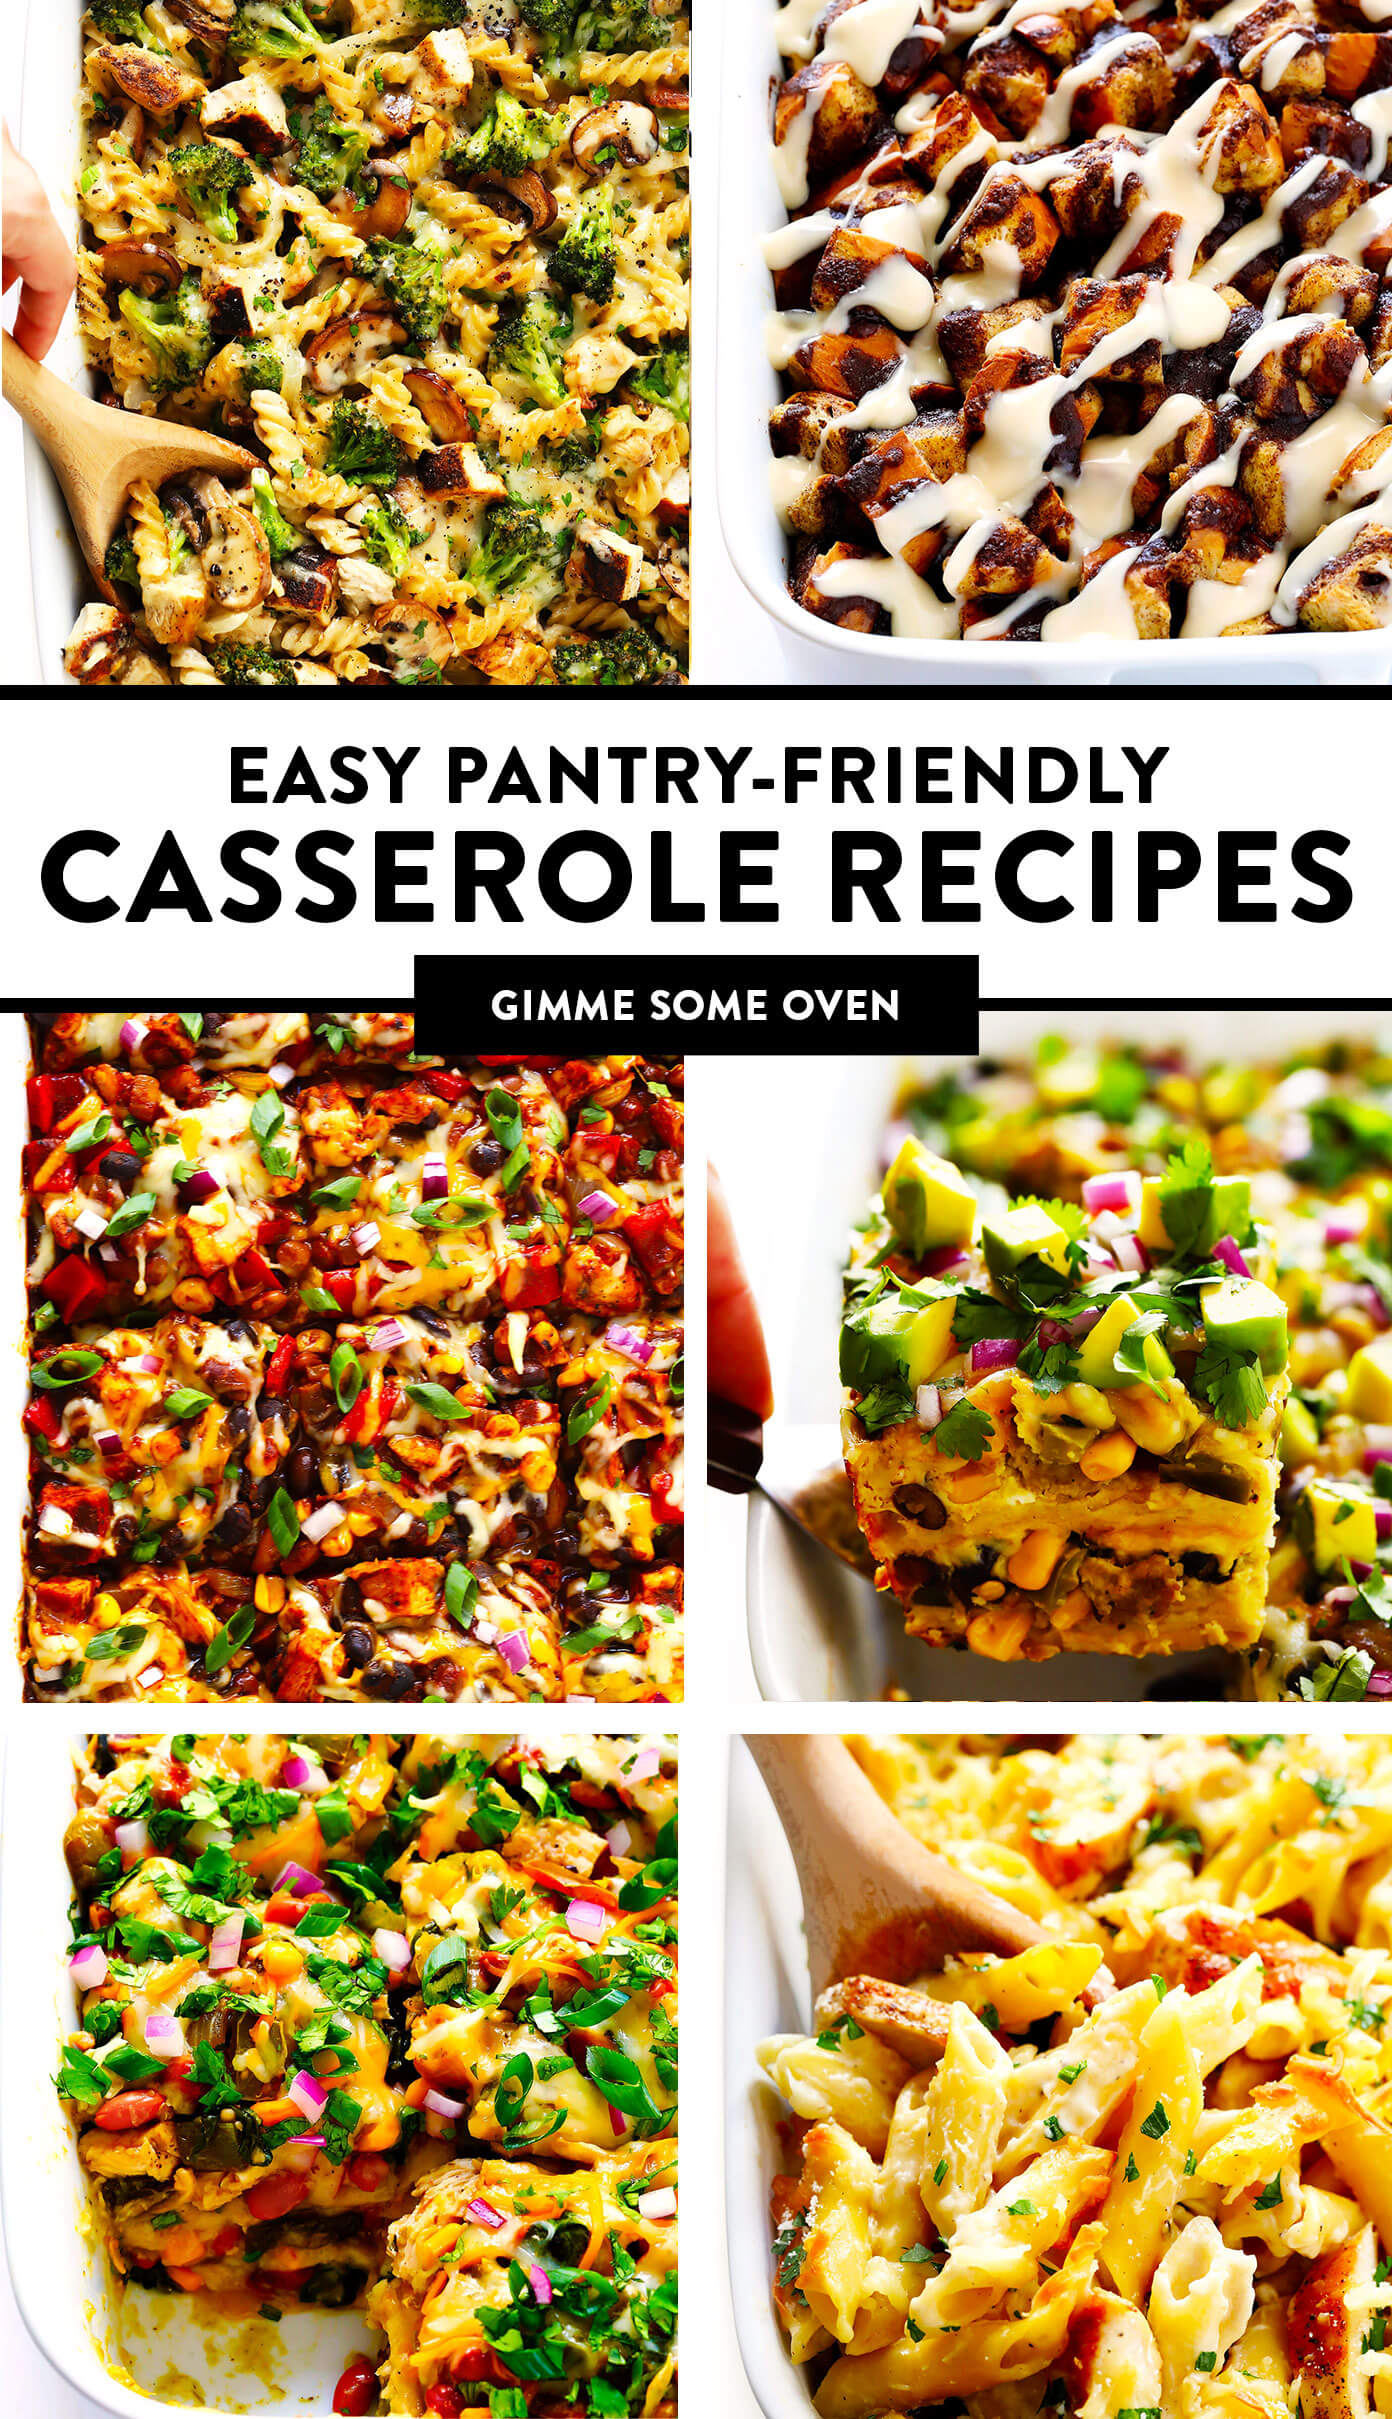 Easy Pantry-Friendly Casserole Recipes